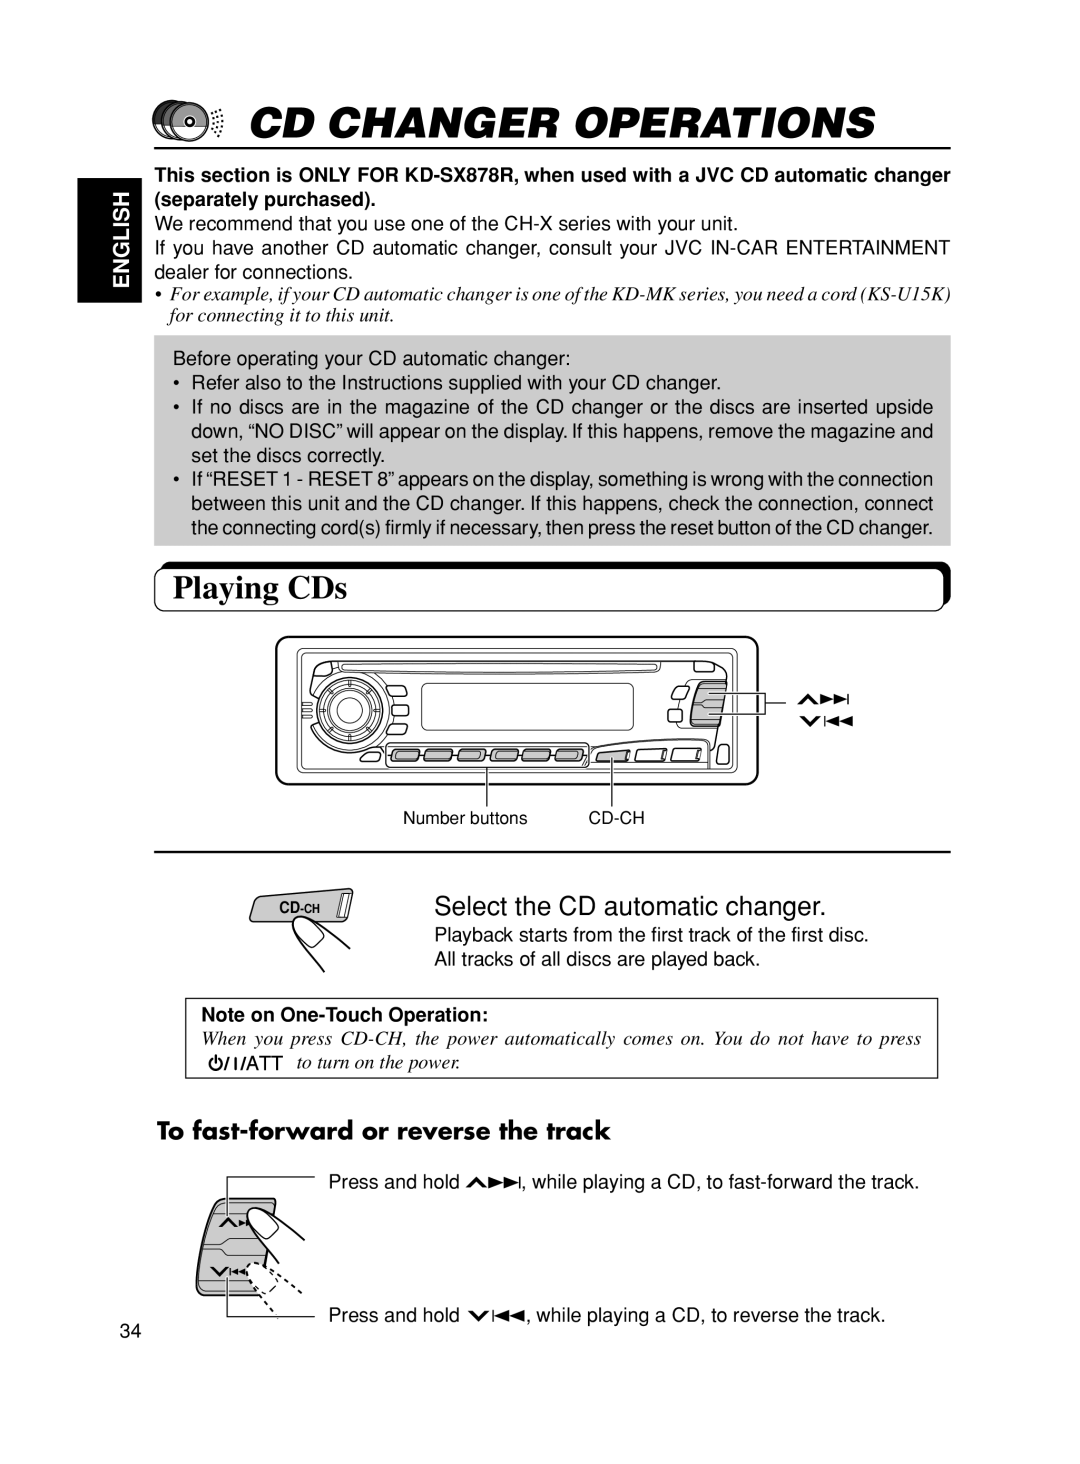 JVC KD-S8R Cd Changer Operations, Playing CDs, To fast-forwardor reverse the track, English, Note on One-TouchOperation 